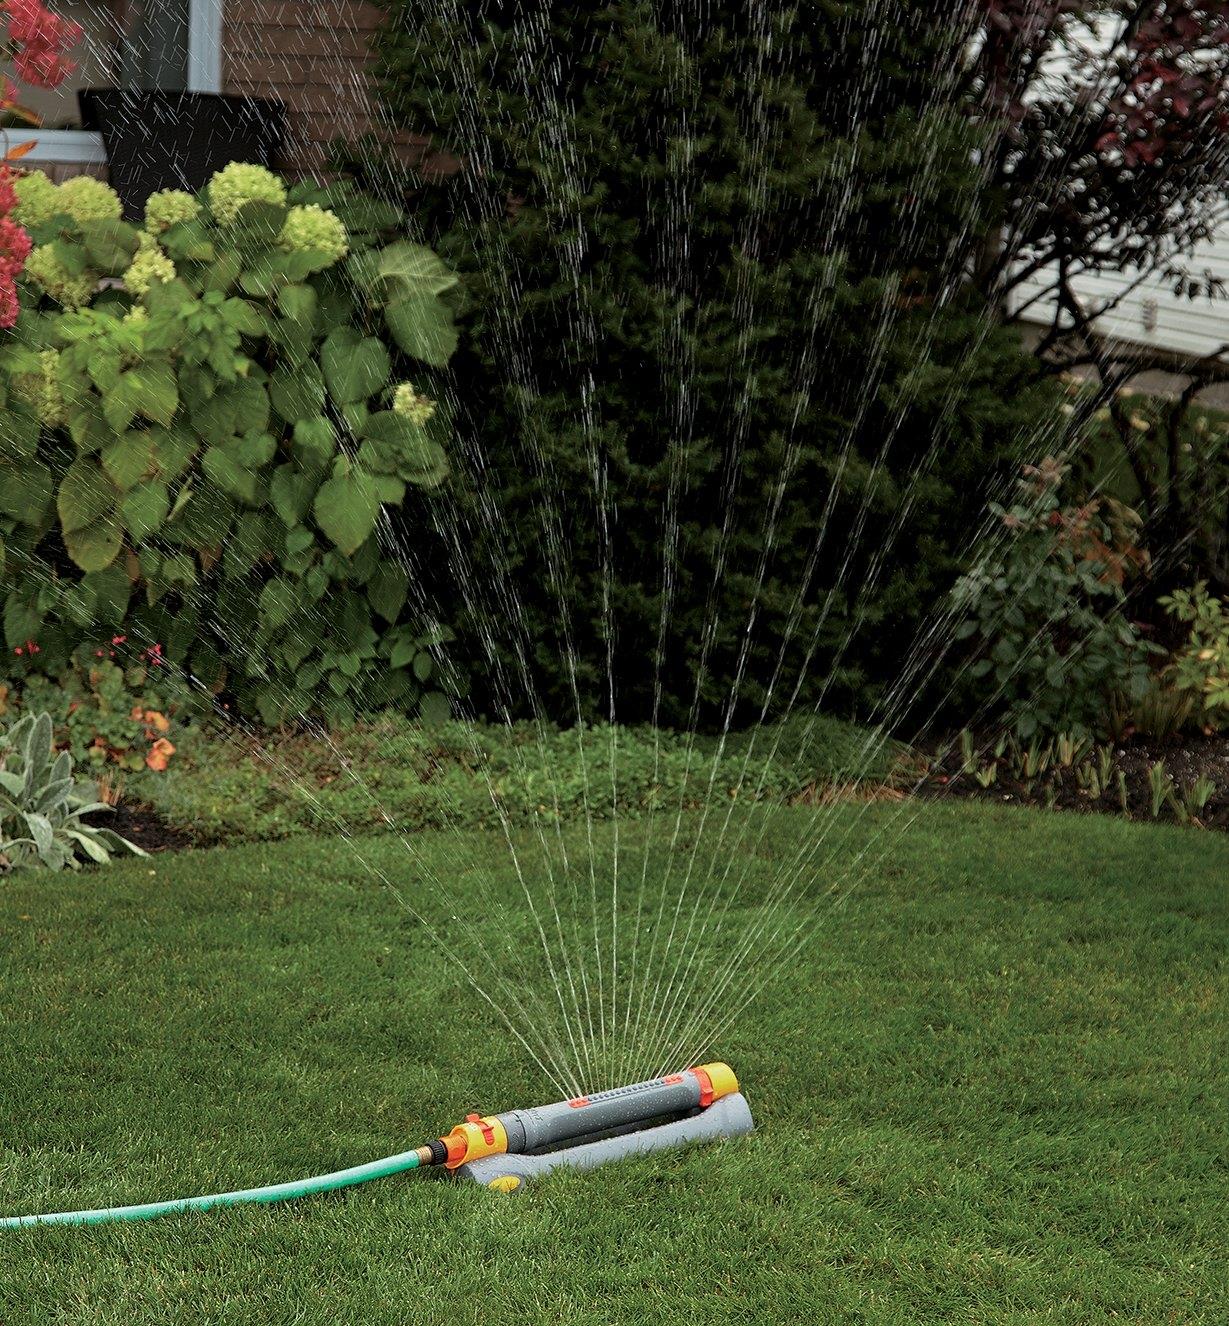 Hozelock Multi-Adjust Sprinkler/Mister watering a lawn with full spray setting